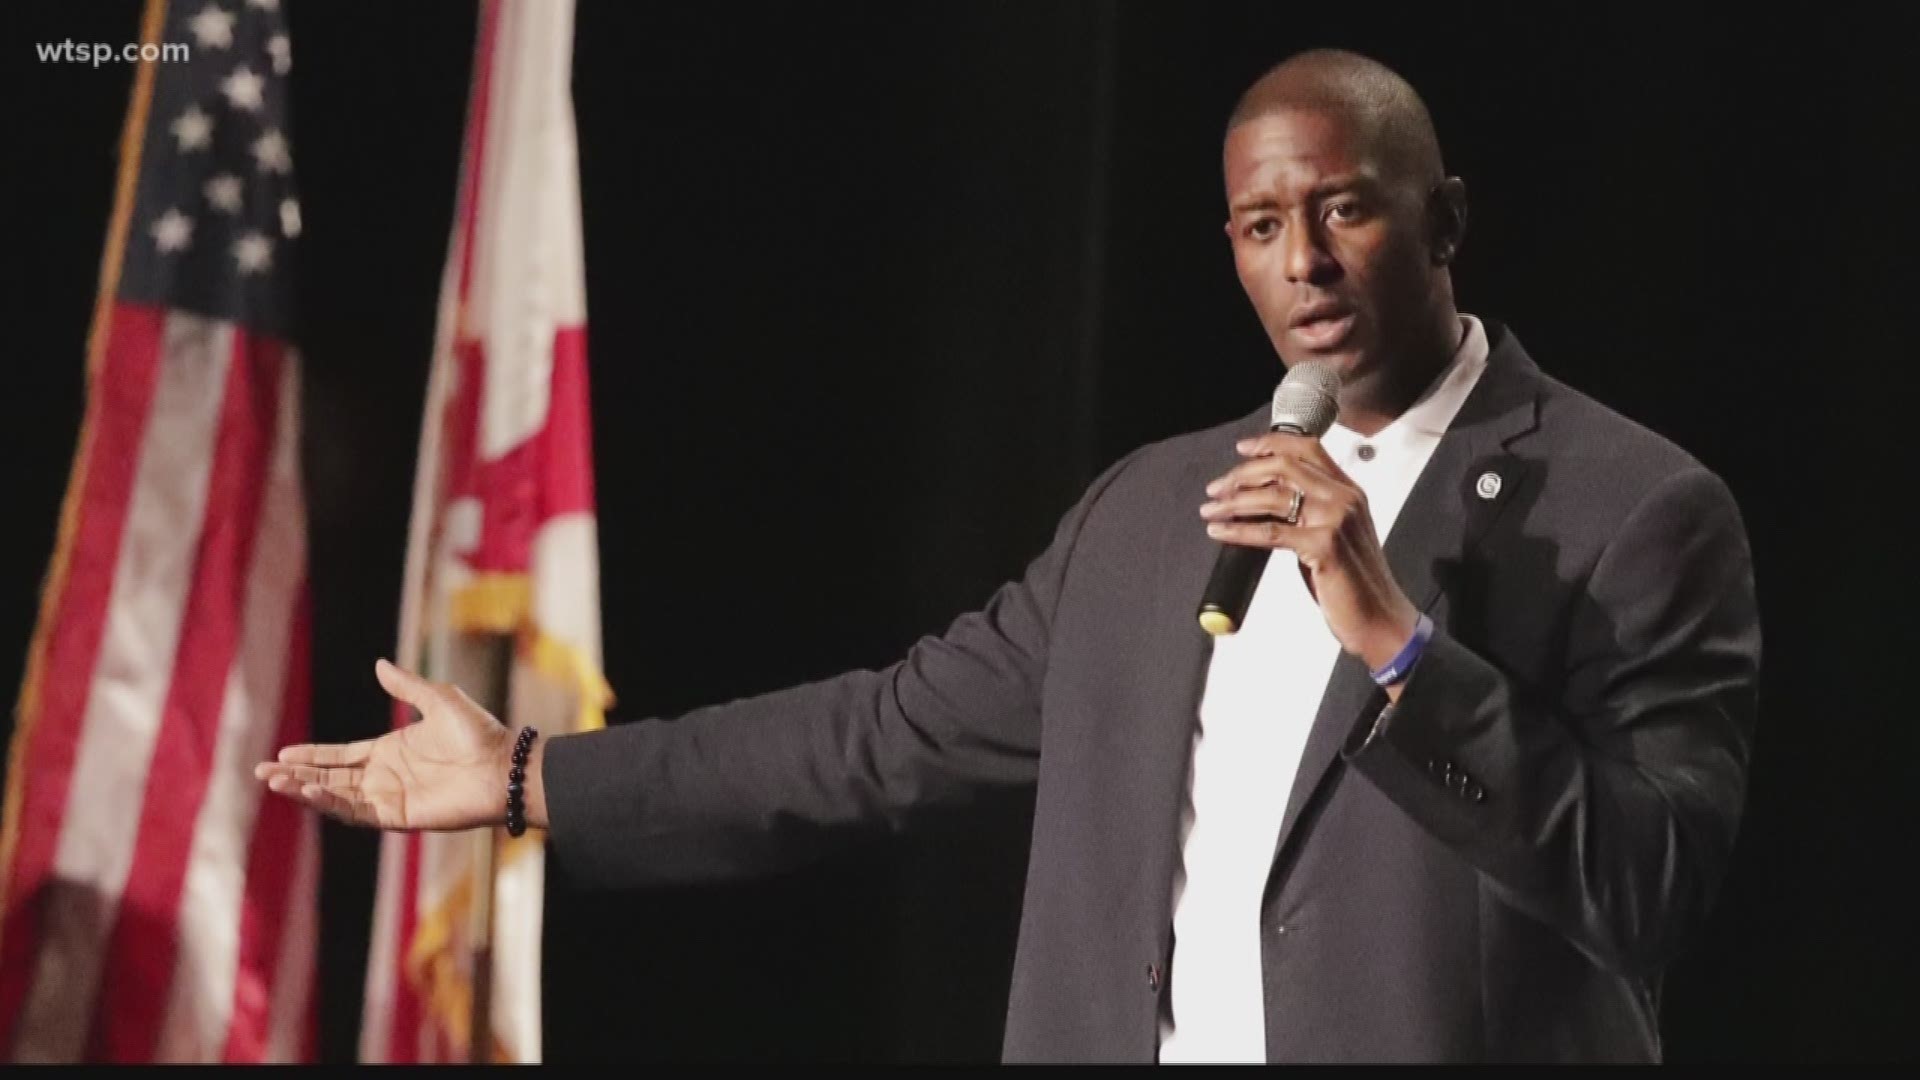 A Florida ethics panel will drop four of five ethics violation charges against Andrew Gillum in exchange for making the former Democratic gubernatorial candidate pay a $5,000 fine, the Orlando Sentinel reports.

According to CBS Miami, the seven-member Florida Commission on Ethics voted to accept the settlement, which comes after an investigation into Gillum's travel and a ticket to the Broadway musical "Hamilton."